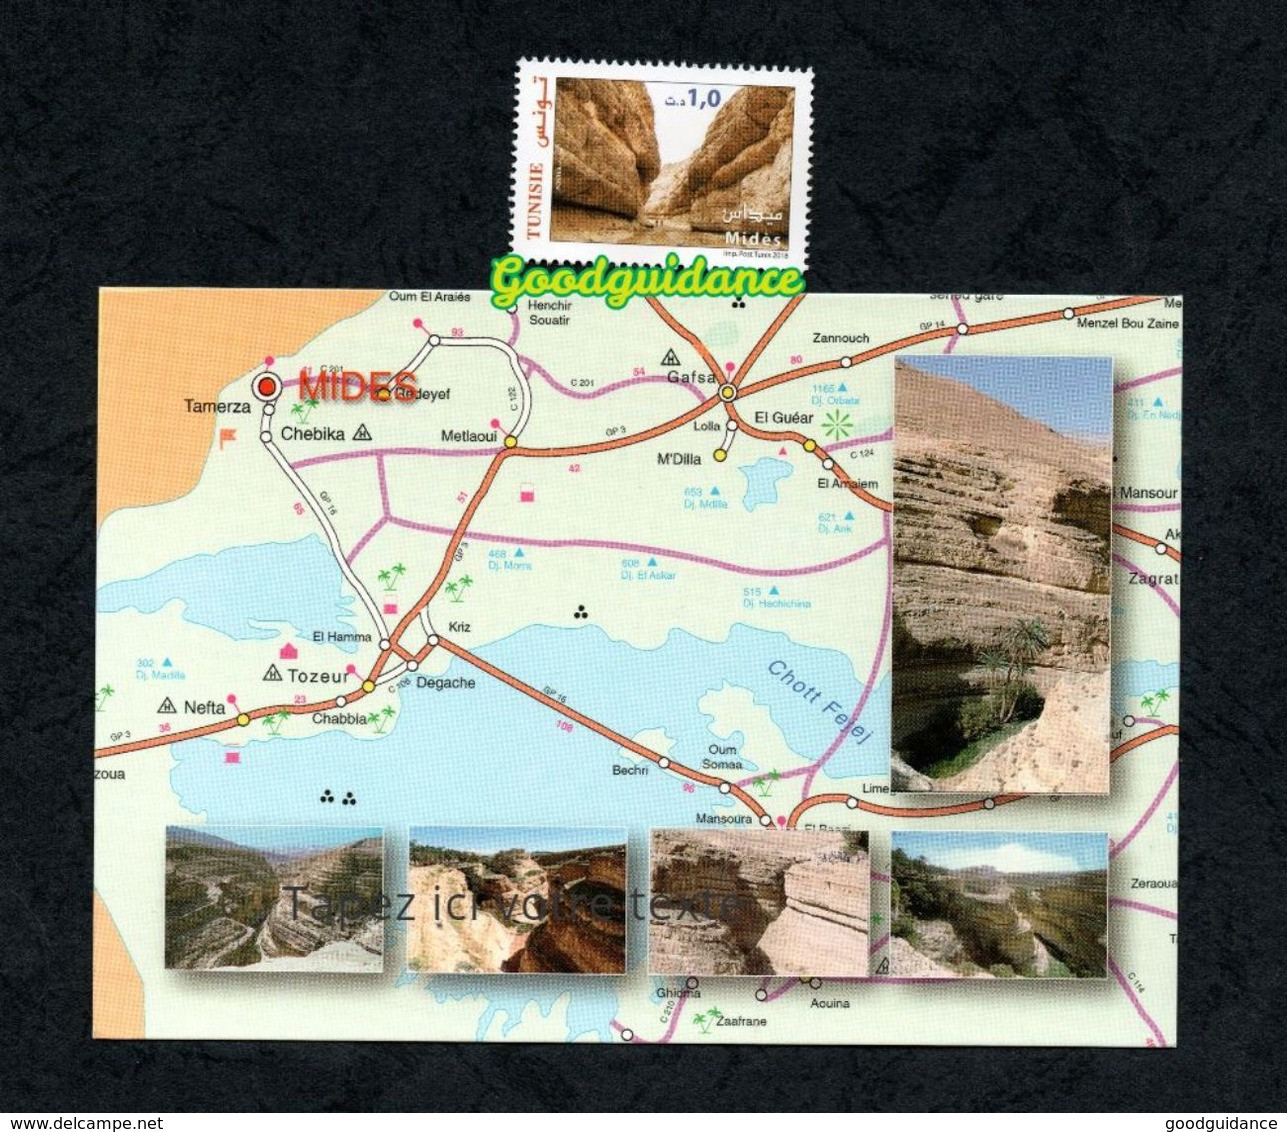 2018- Tunisia- Touristic And Archaeological Sites In Tunisia- Mides Postcard And Stamp MNH** - Archaeology